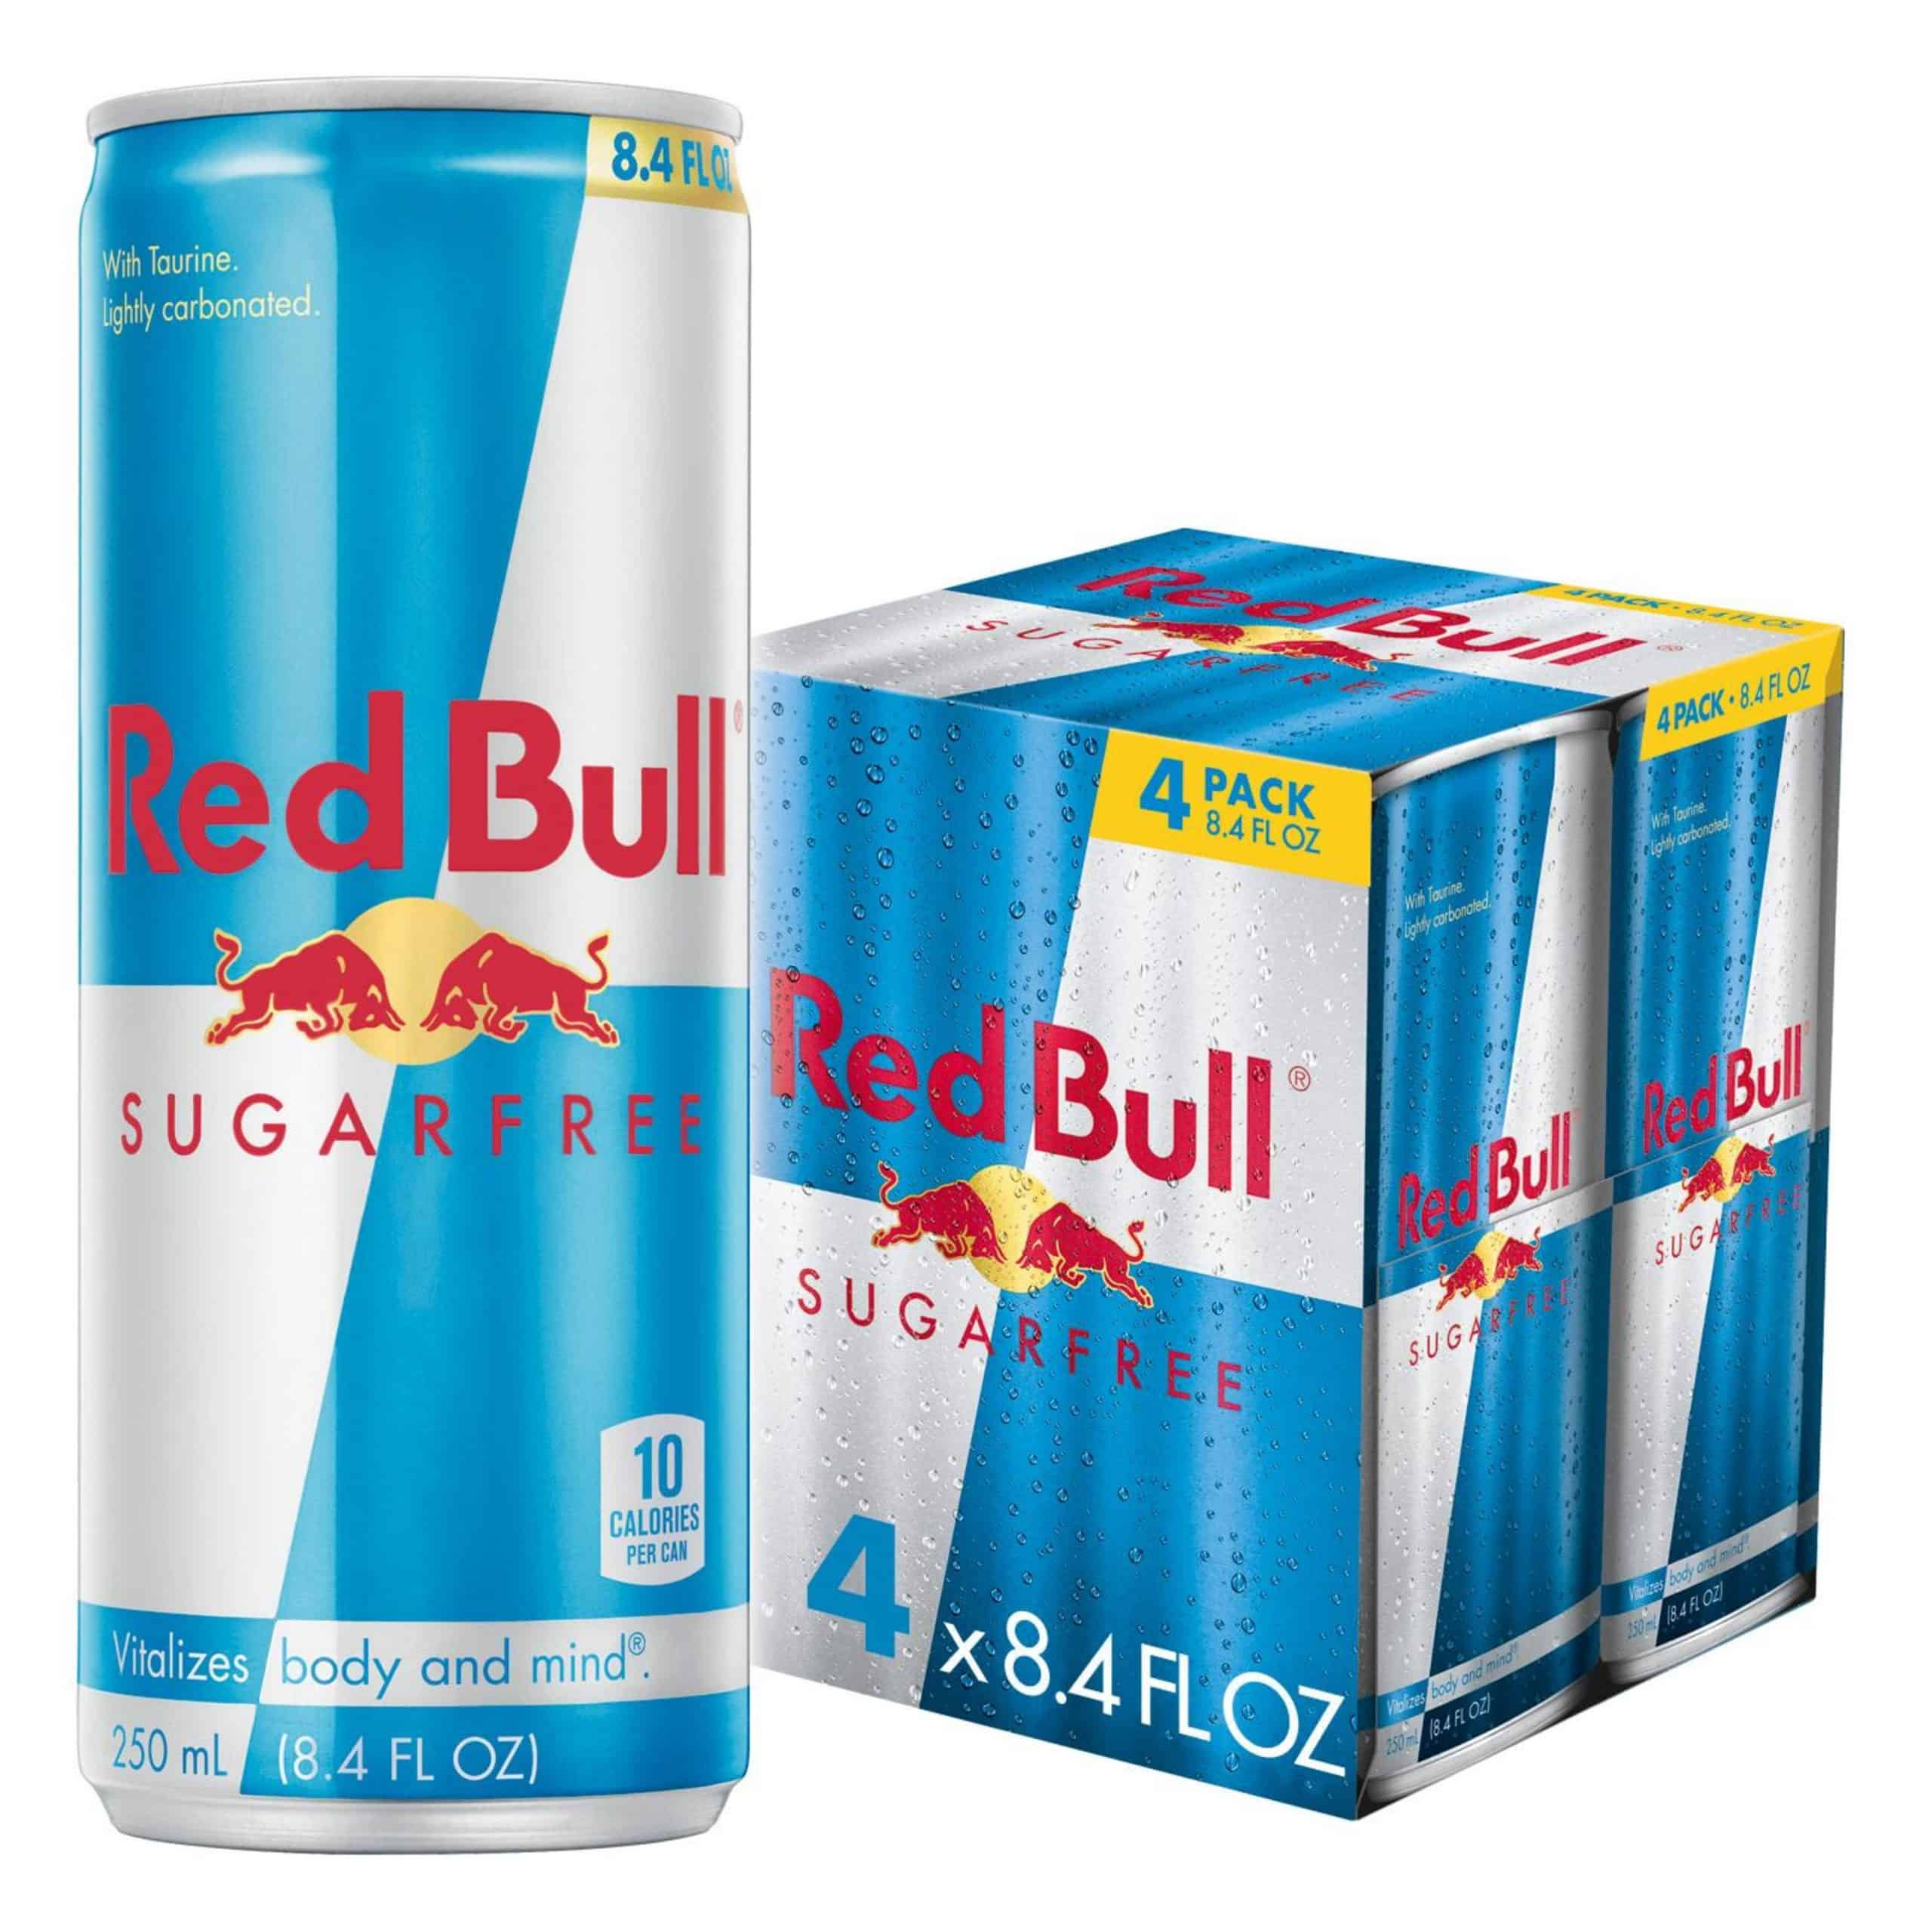 (4 Cans) Red Bull Sugar Free Energy Drink, 8.4 Fl Oz Low Calorie Energy ...